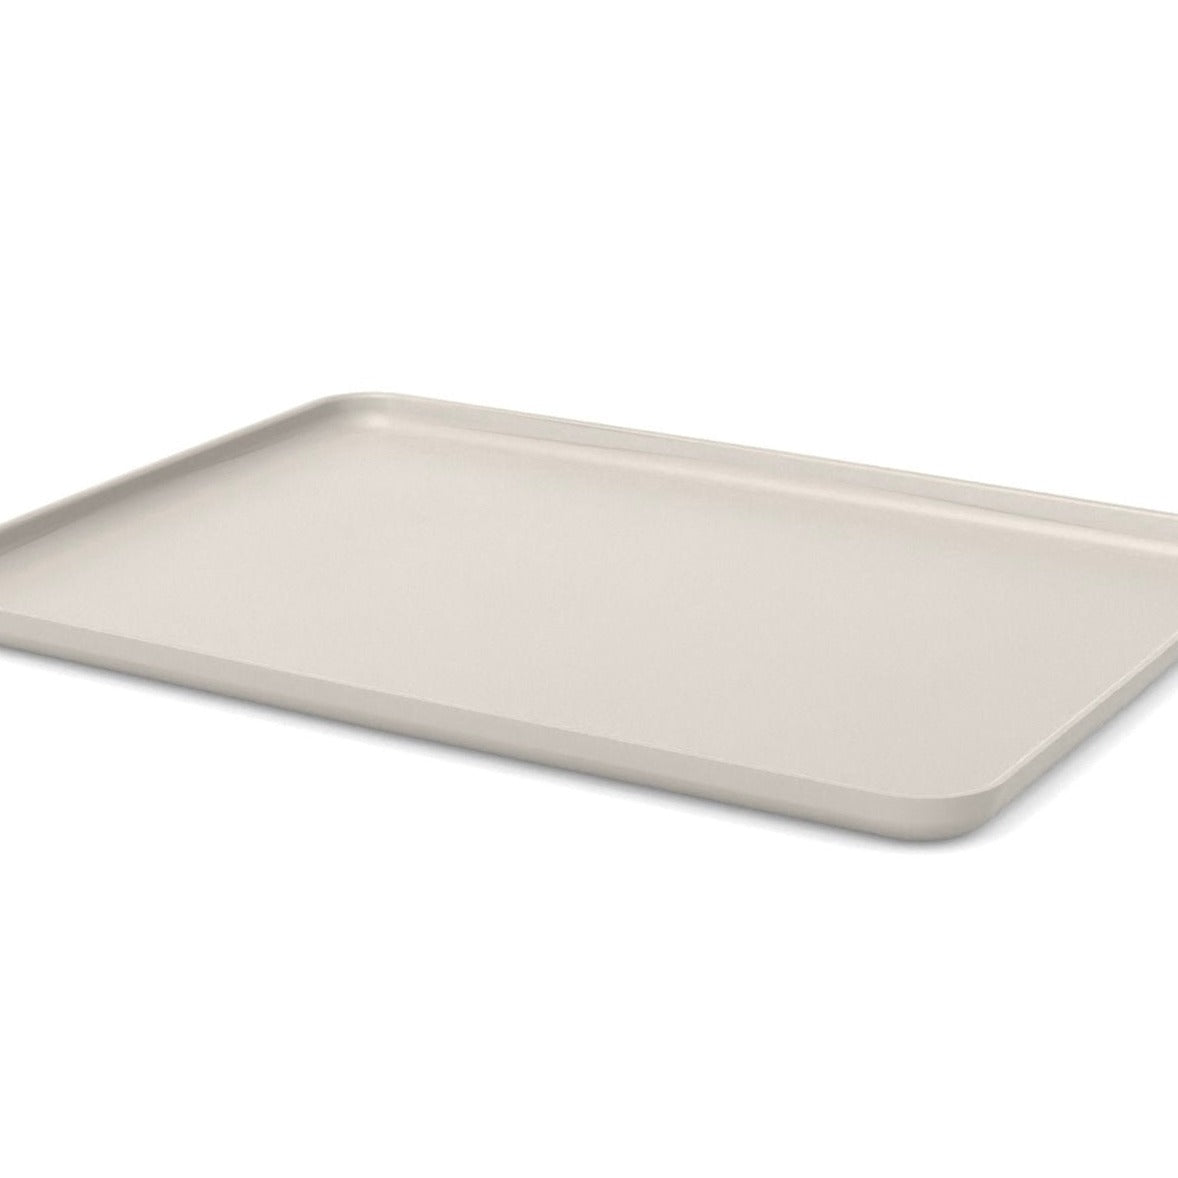 Large Serving Tray - Stone